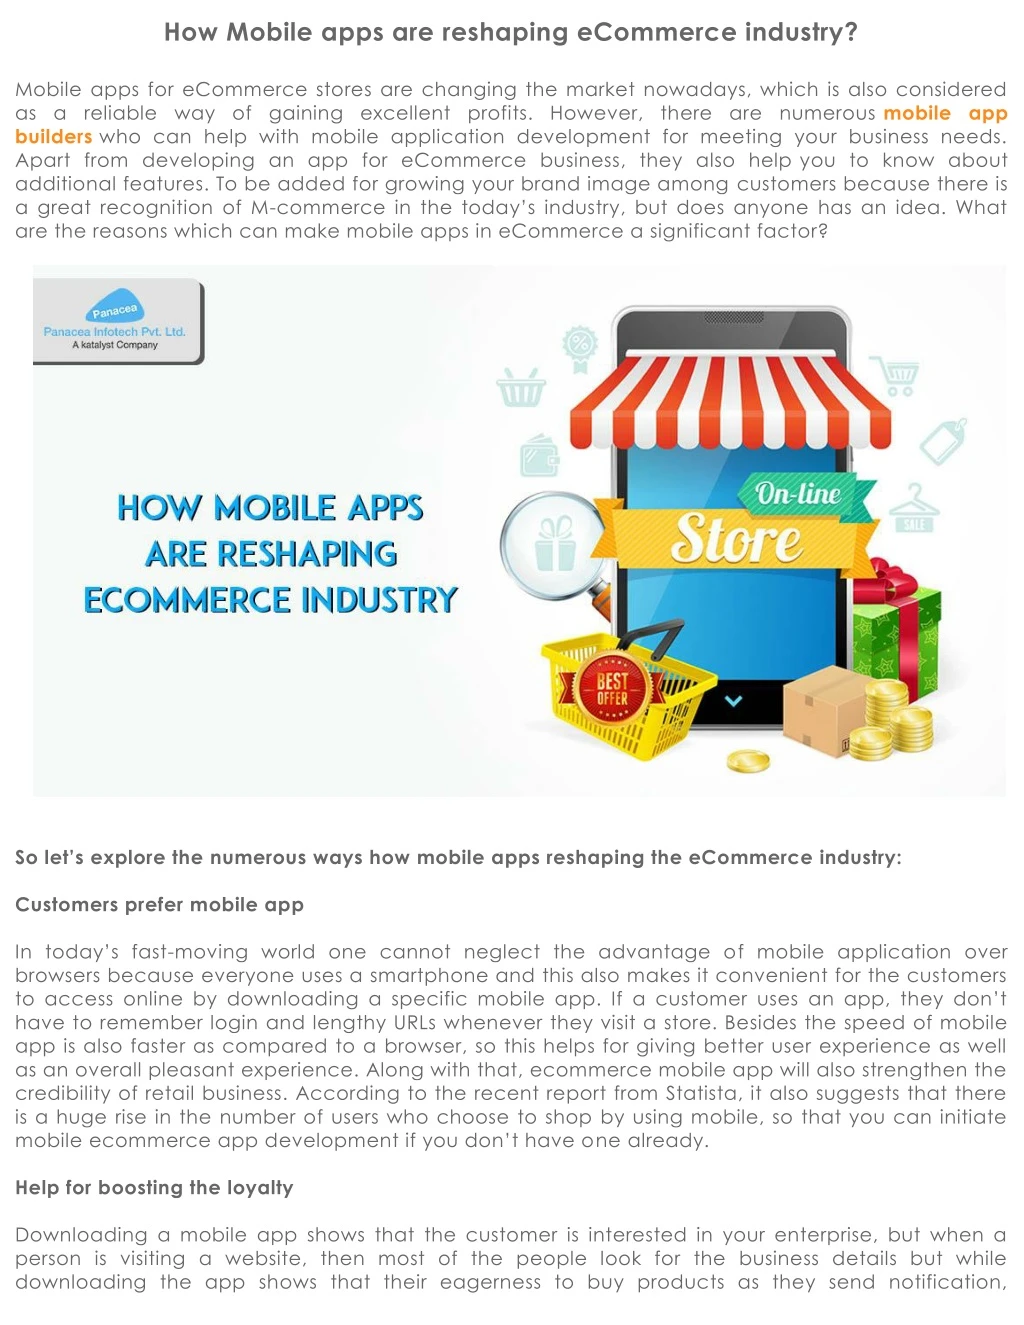 how mobile apps are reshaping ecommerce industry